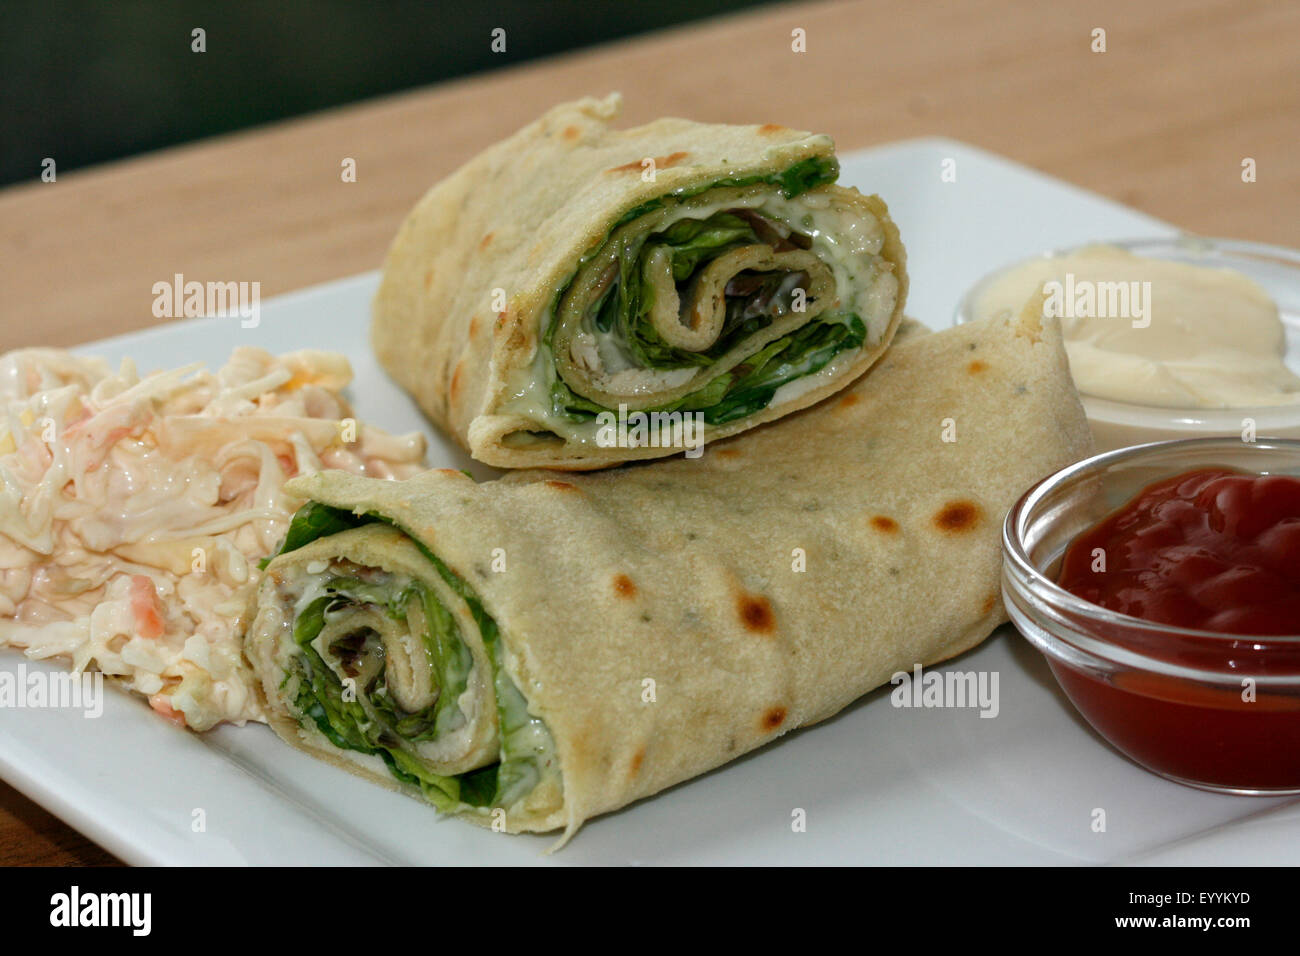 A chicken & pesto wrap with coleslaw, ketchup and mayonnaise Stock Photo